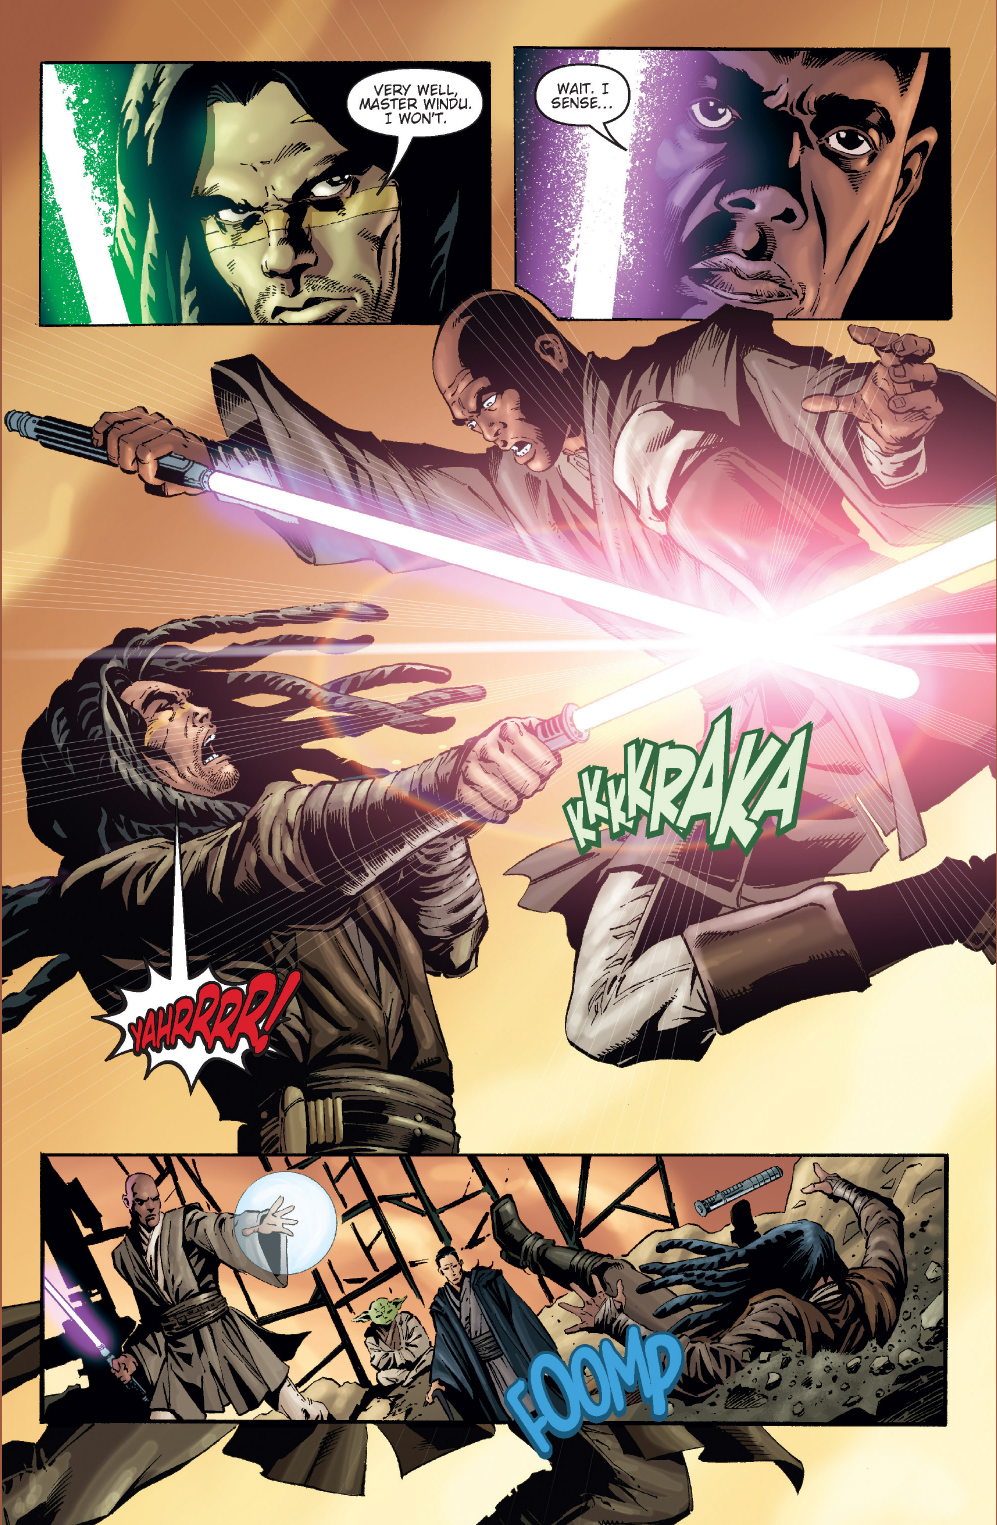 mace windu spars with quinlan vos 